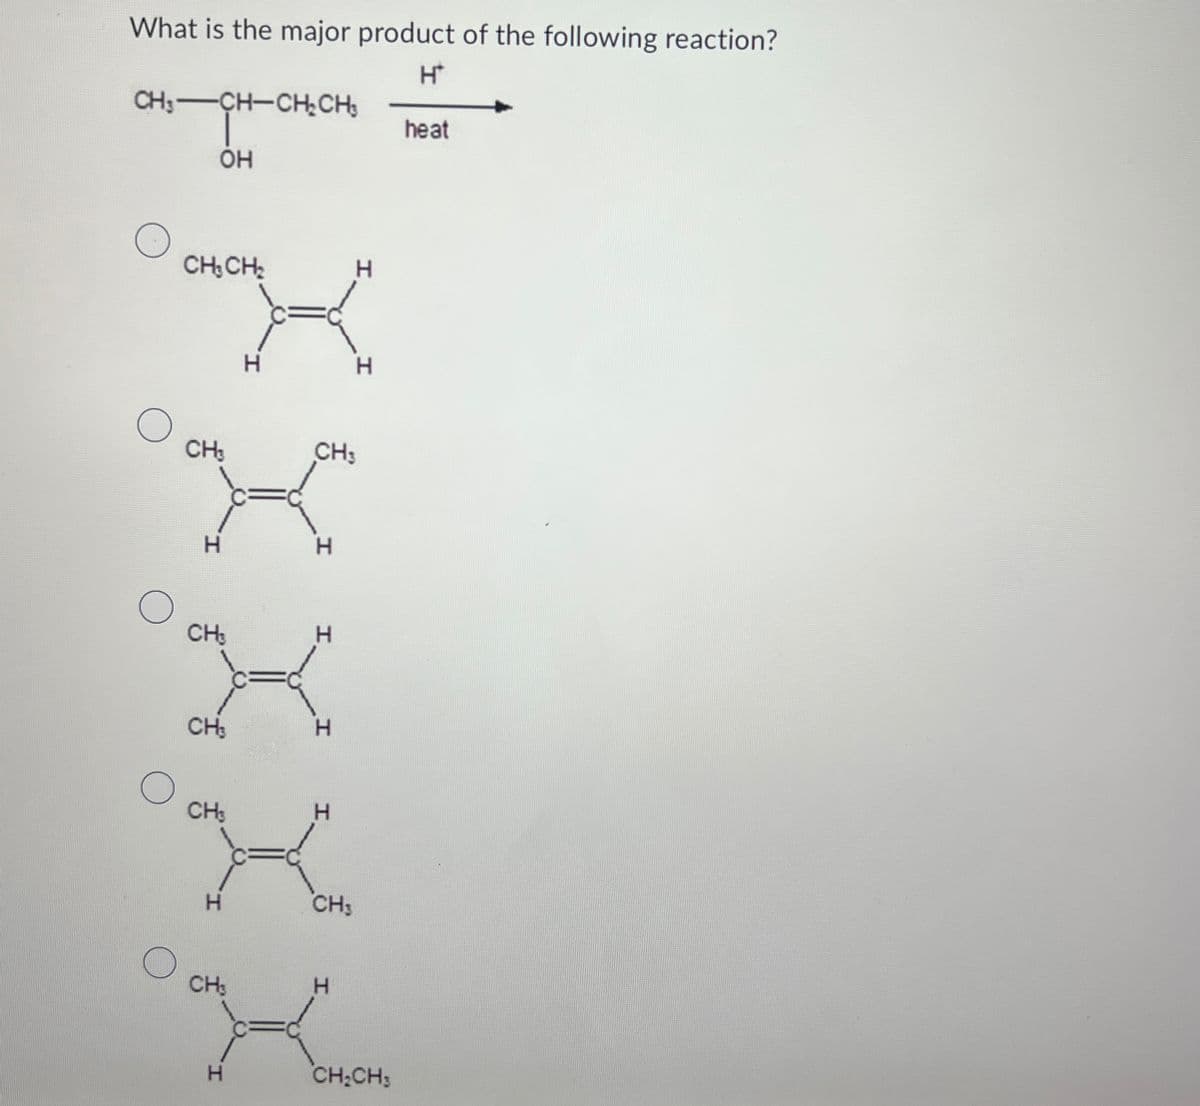 What is the major product of the following reaction?
CH-CH-CH₂CH₂
-CH-CH-CH₂
H*
heat
OH
CH3CH2
H
H
H
О
CH3
CH
H
H
О
CH3
H
CH3
H
CH
H
I.
H
CH3
CH
H
H
CH2CH3